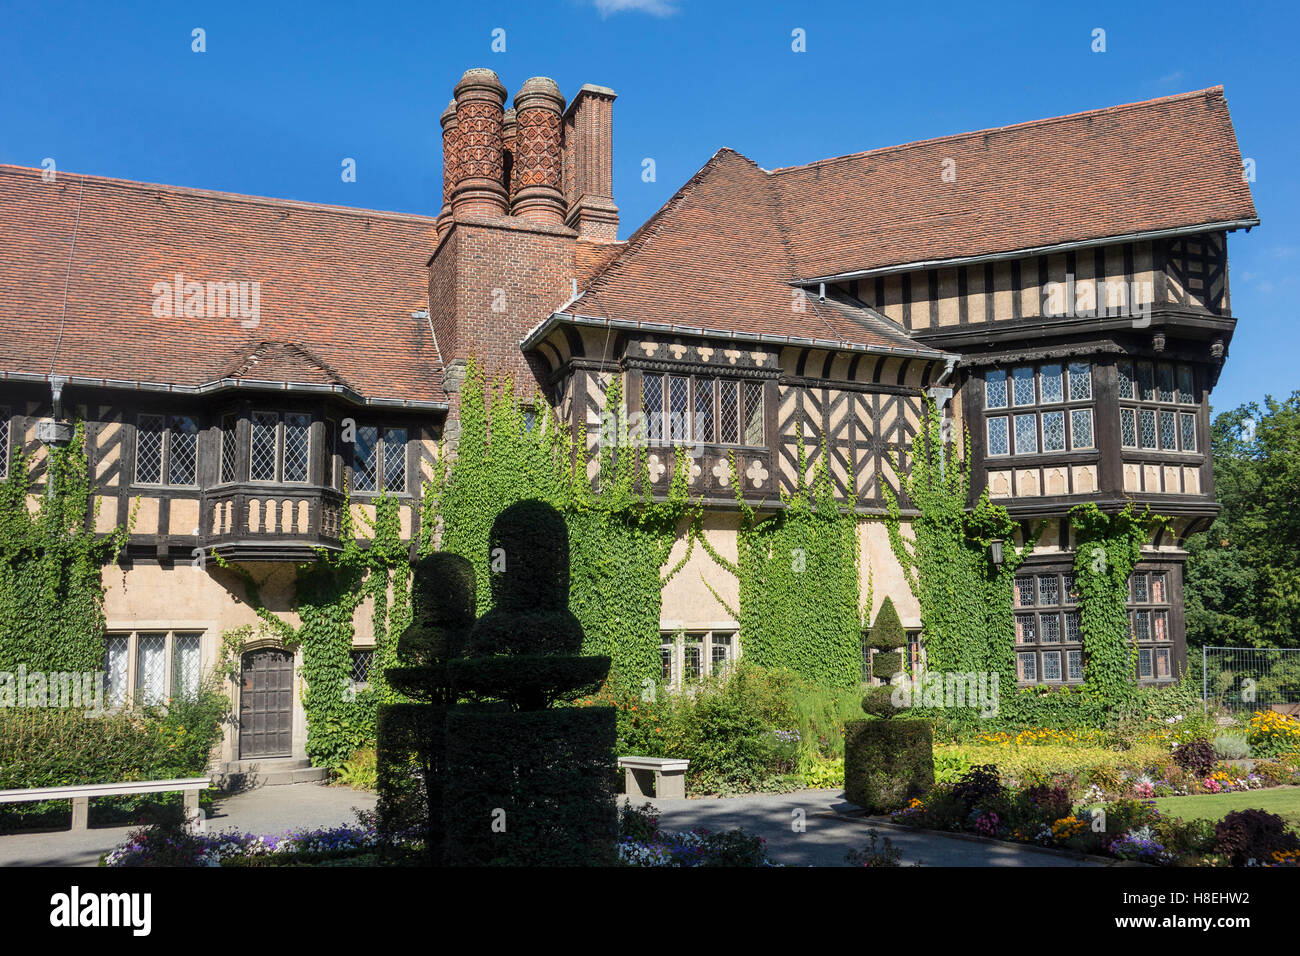 Schloss Cecilienhof, scene of the 1945 Conference at the end of World War II, Potsdam, Brandenburg, near Berlin, Germany, Europe Stock Photo